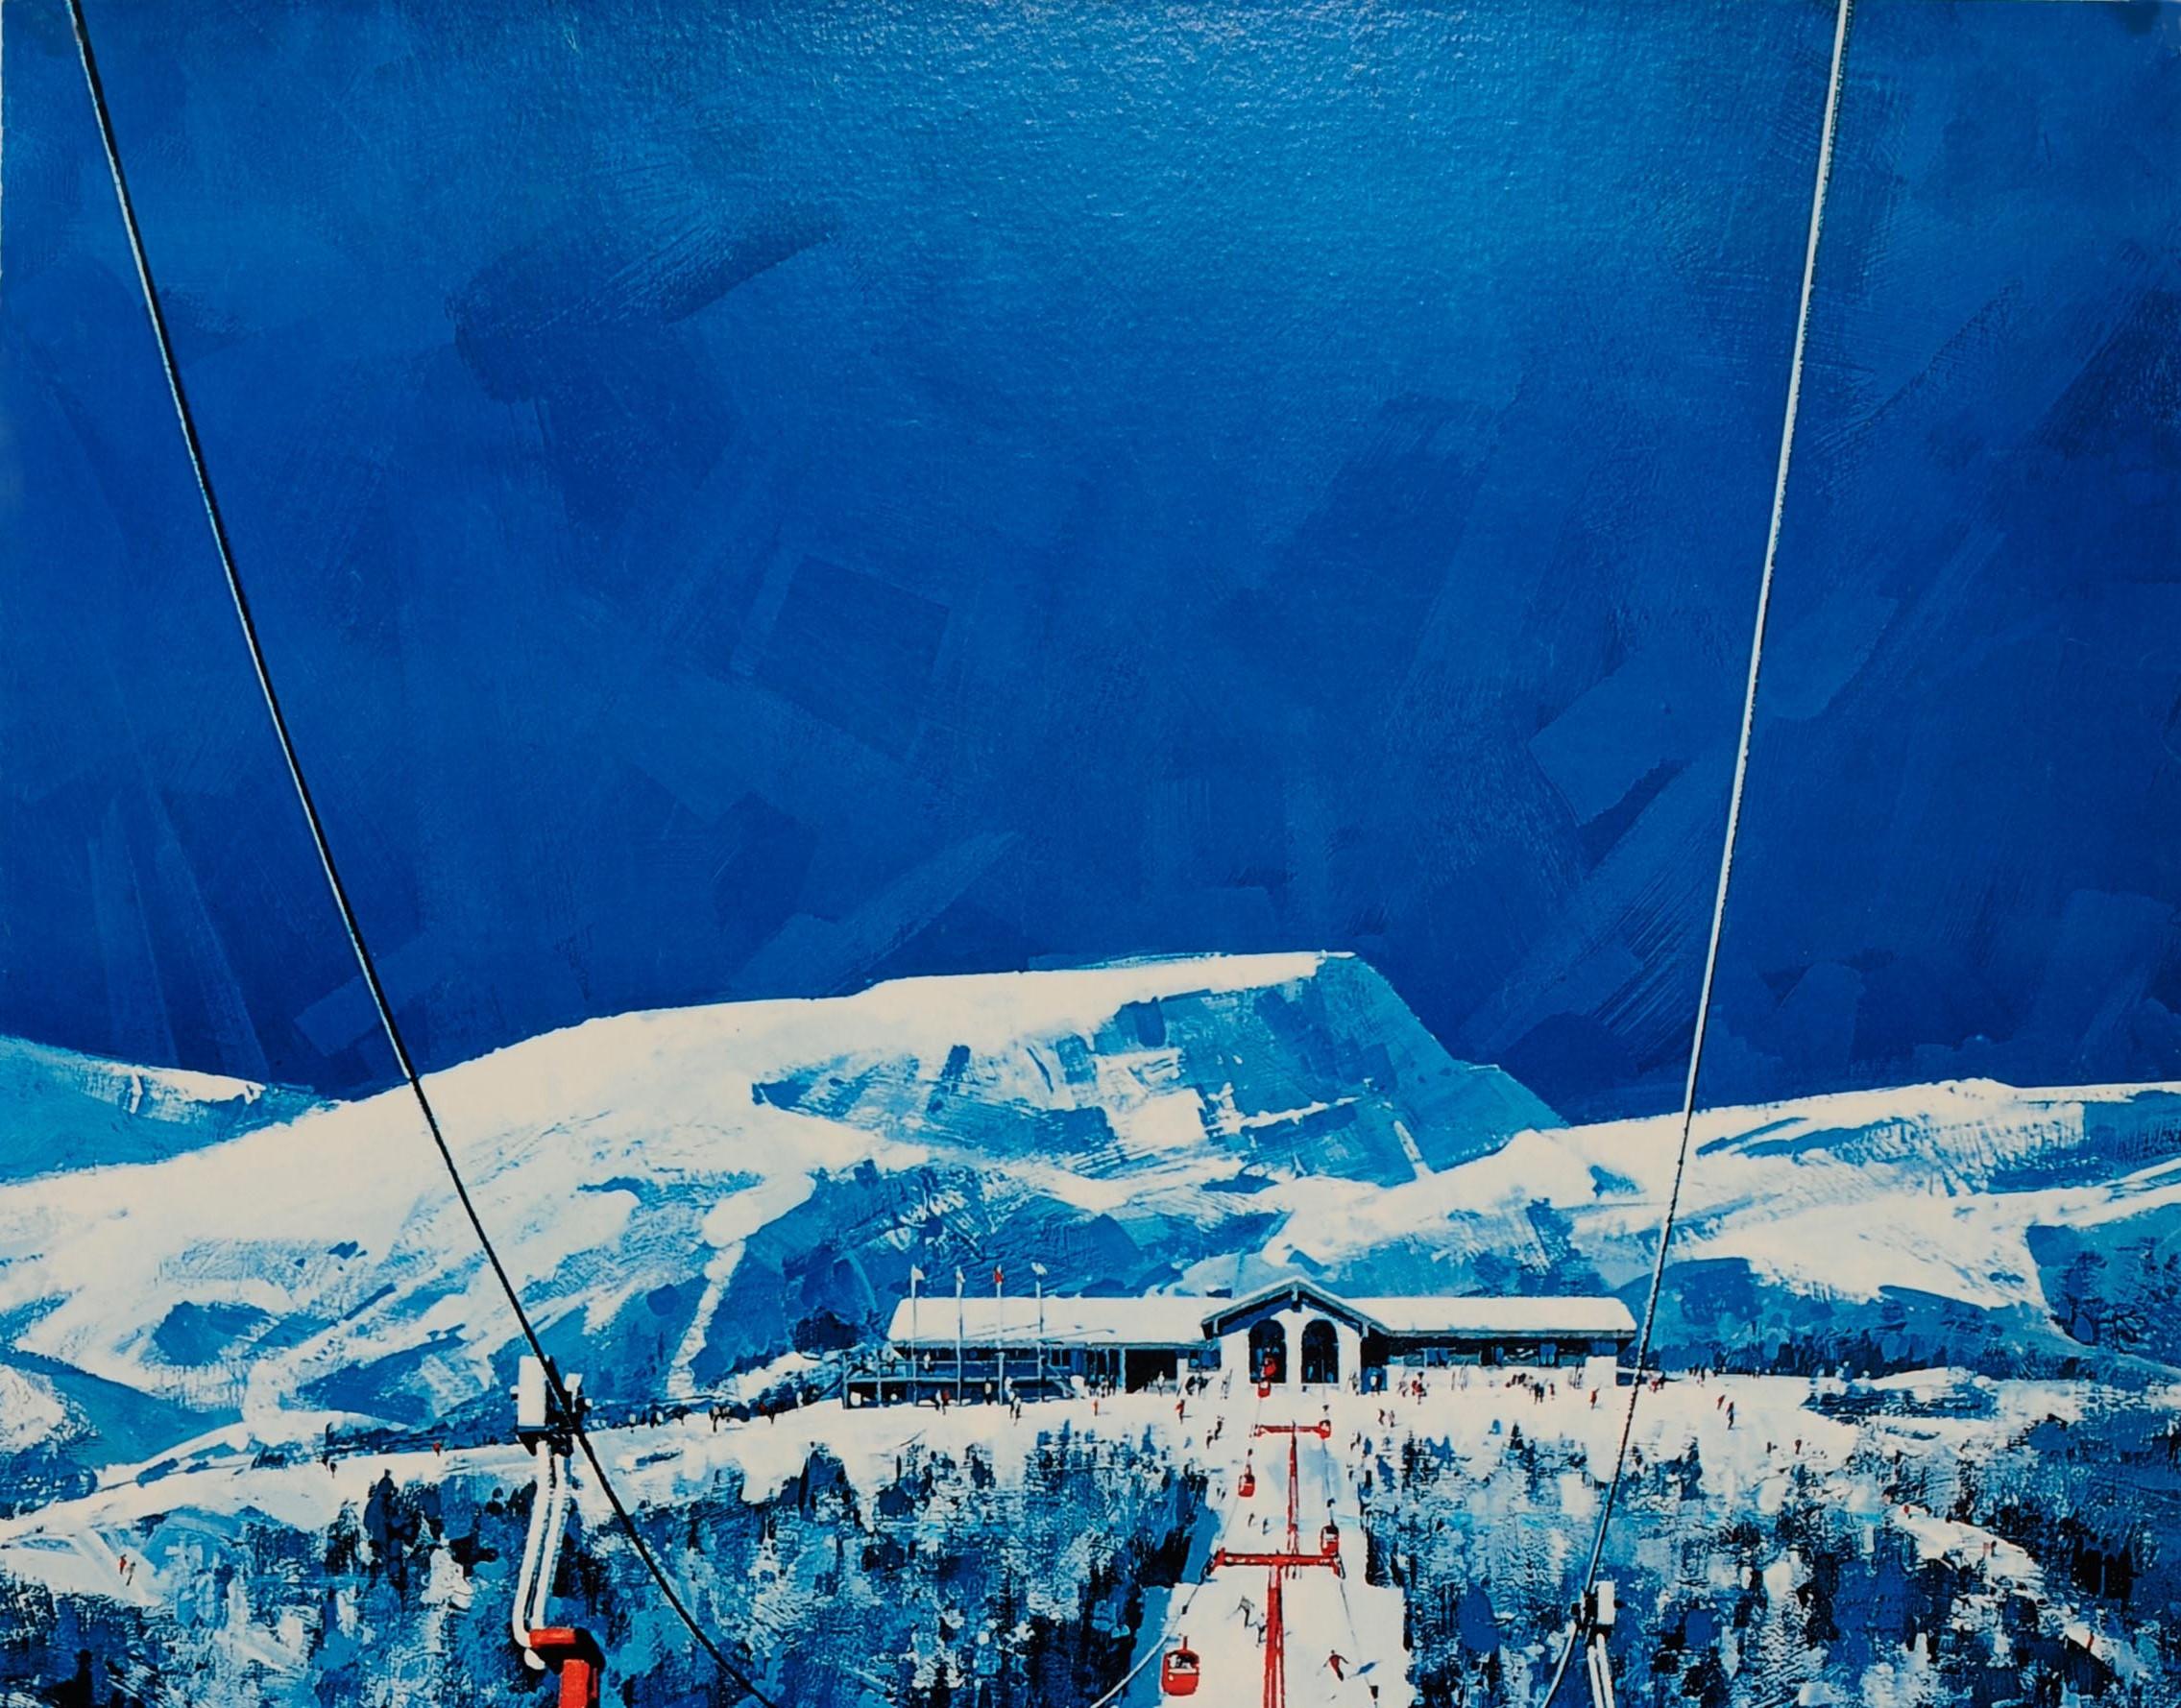 Original vintage skiing poster for the Stowe alpine ski resort (since 1933) in Vermont America featuring a great image of skiers in red cable car cabins riding over the trees and skiers skiing down the pistes below in striking blue and white shades